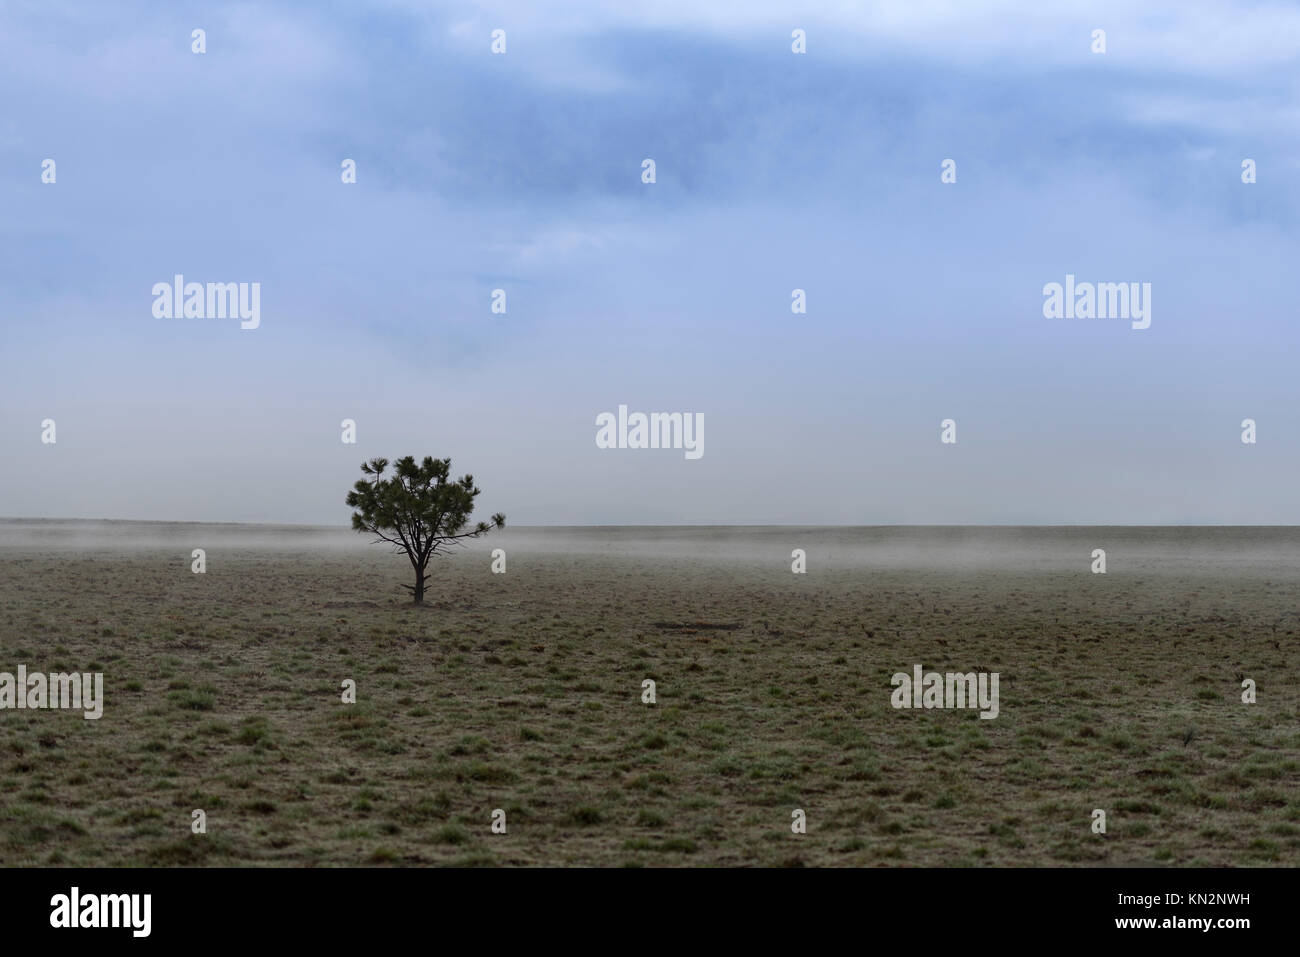 A pitiful dwarf tree sits in an open pasture in fog and cloudy sky Stock Photo